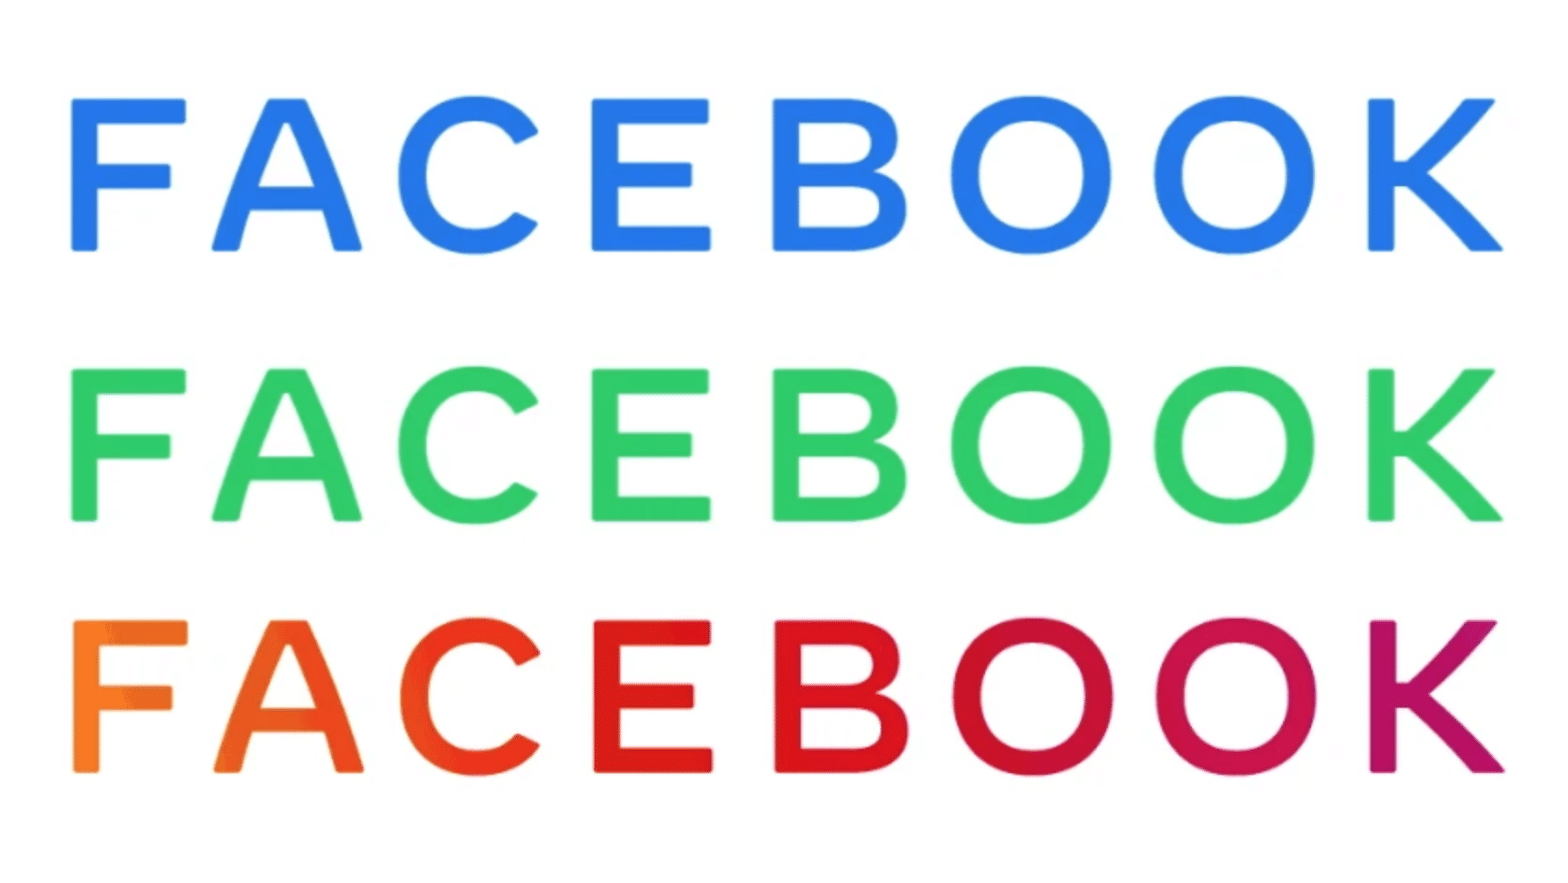 New corporate logo of Facebook, in 3 colors, used for 